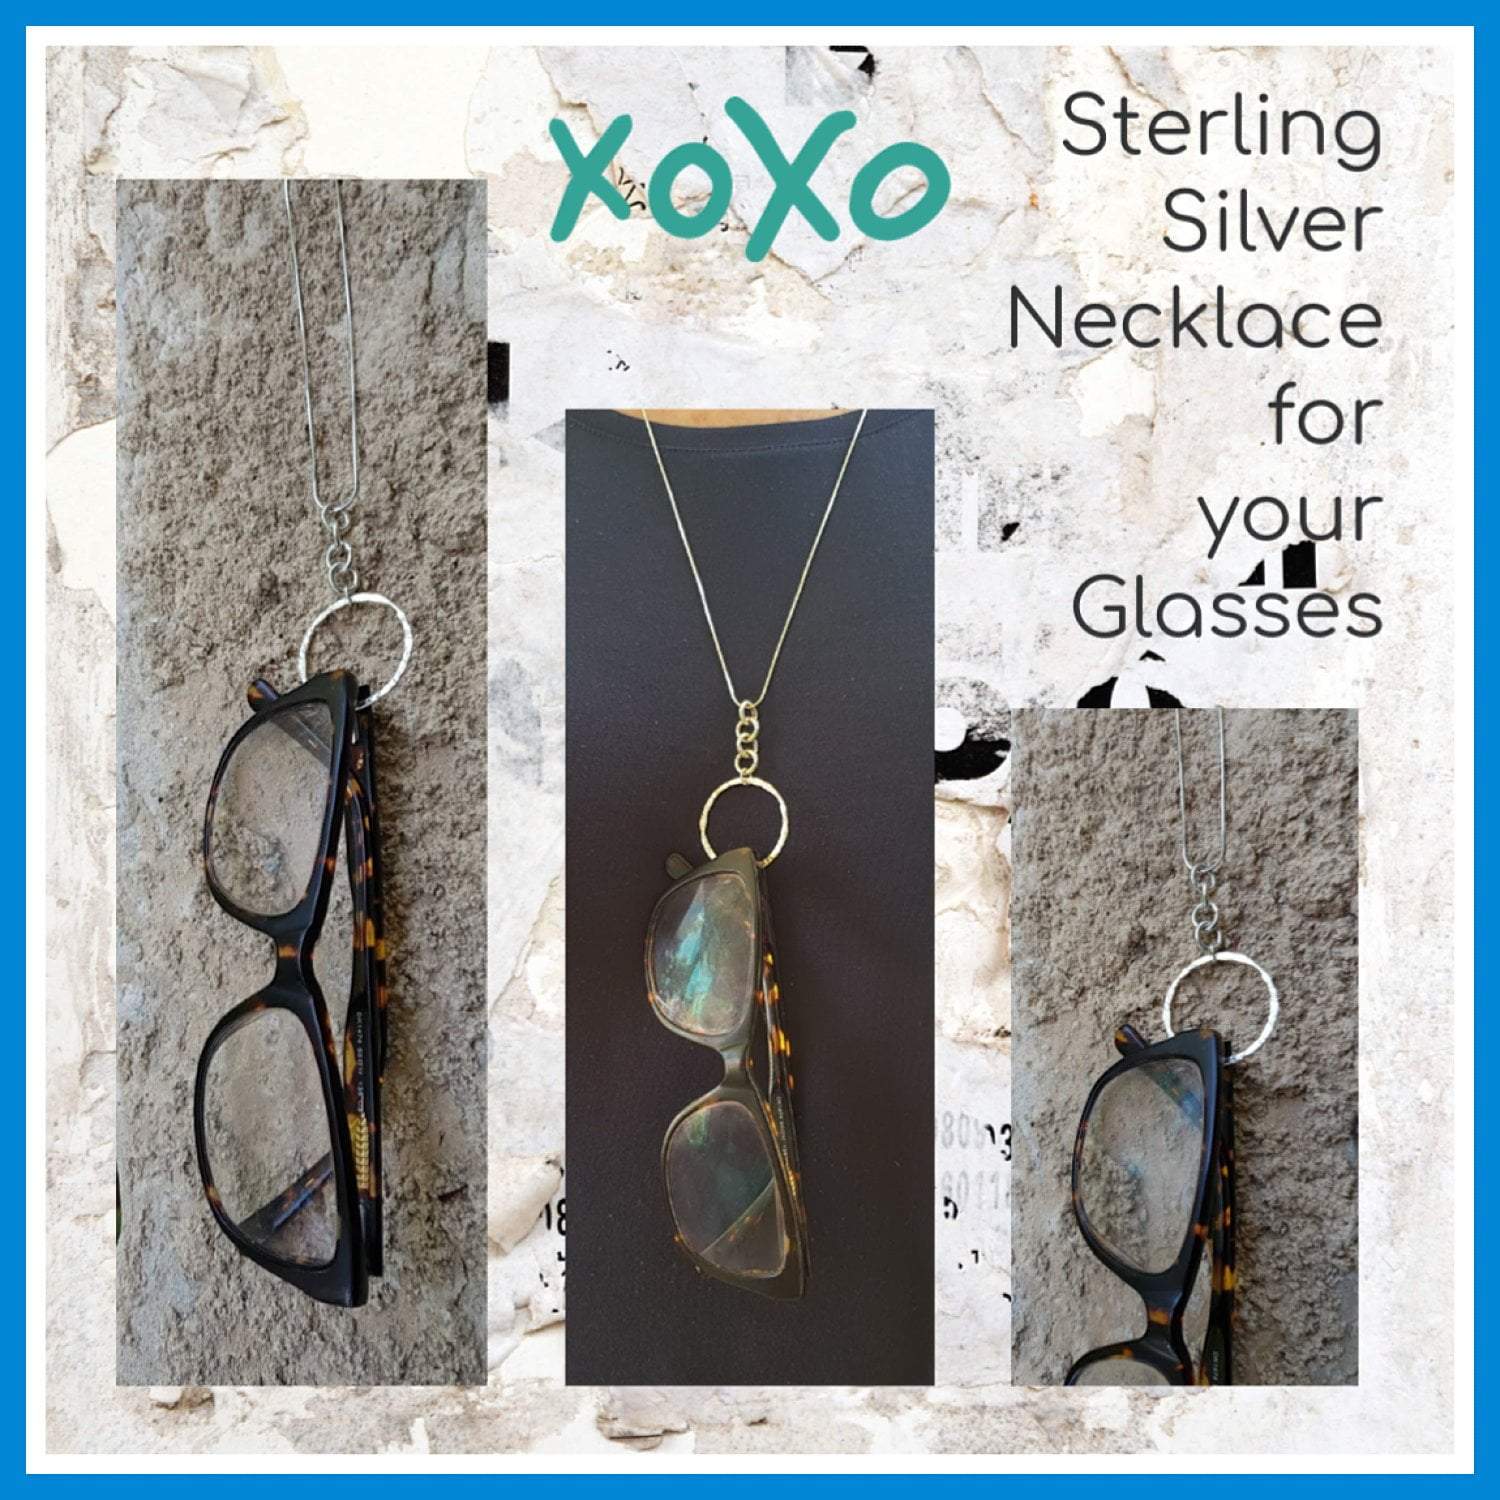 Bluenoemi Jewelry Necklaces boho-chic designer sterling silver necklace for carrying your glasses. Unisex. Valentine gift